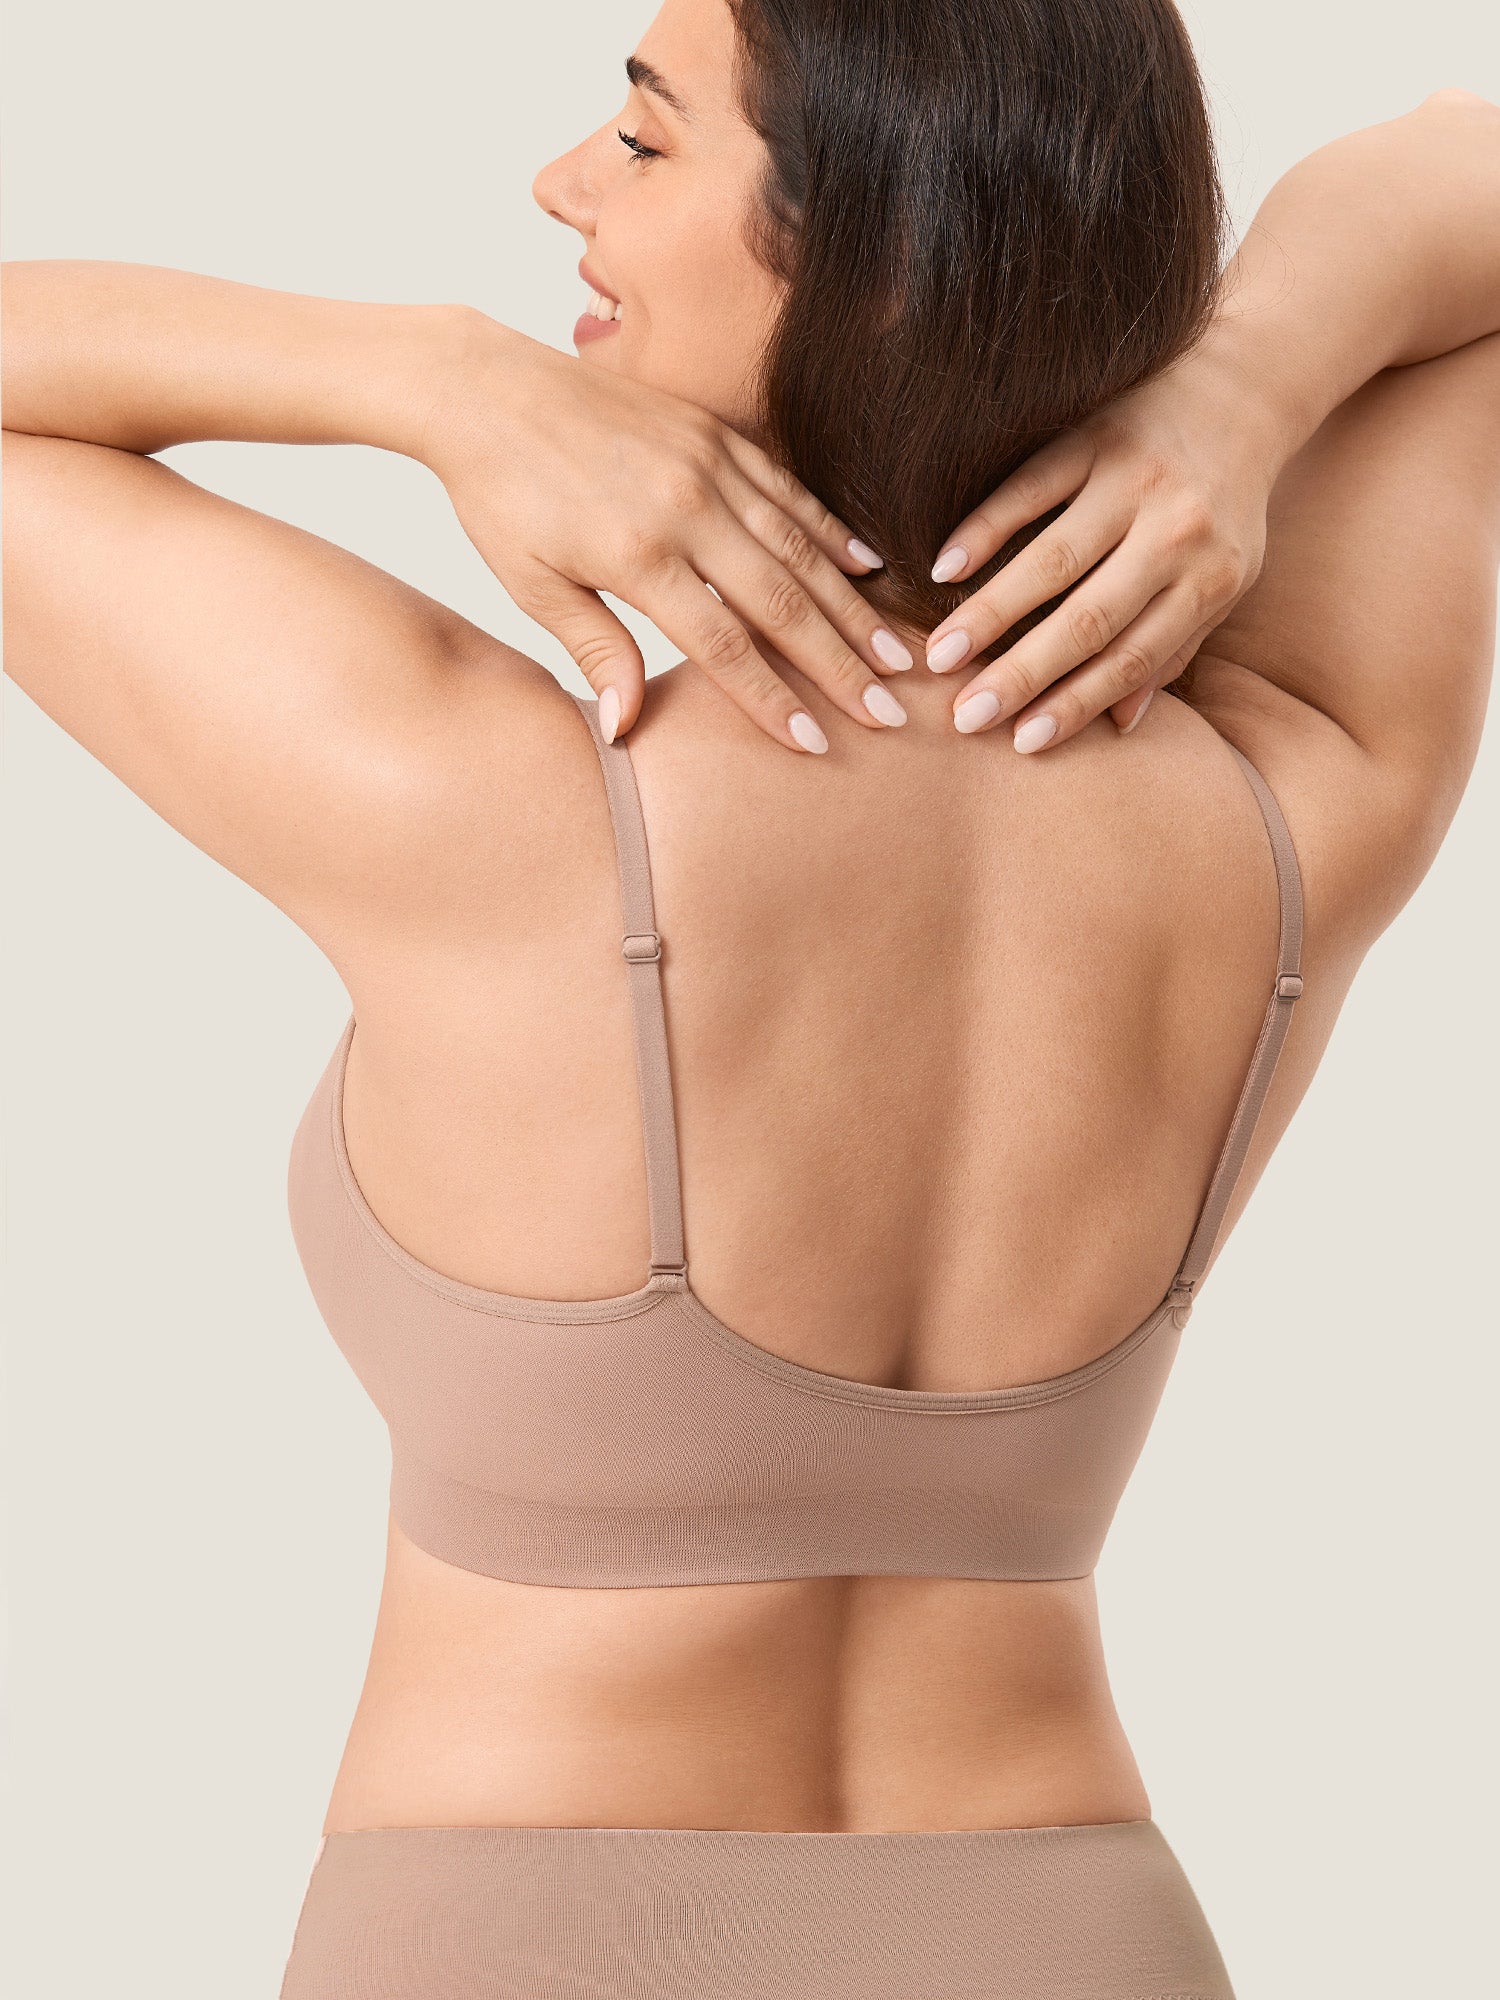  Seamless Nursing Bra with Adjustable Back Clasp and Removable  Soft pad Inserts - Nd, L : Clothing, Shoes & Jewelry